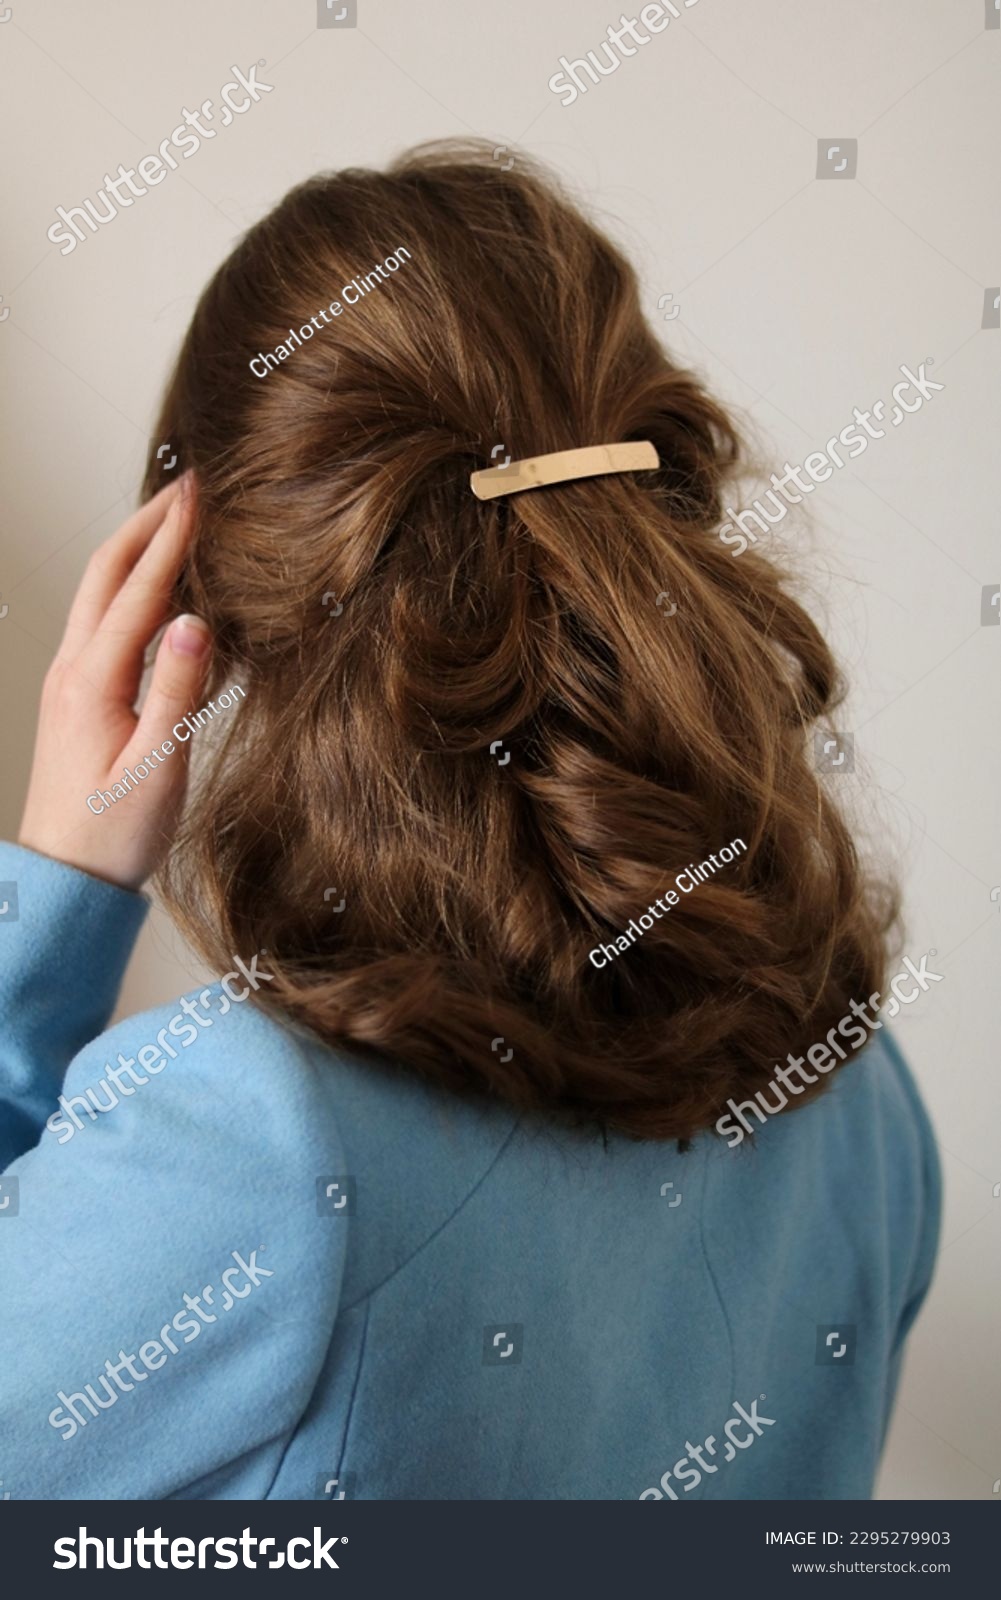 Young woman with thick, natural blonde hair pulled back and pinned half-up by a barrette hair clip. Gold metal barrette. Pretty hairstyle. Elegant hairstyle. Blue coat.  #2295279903